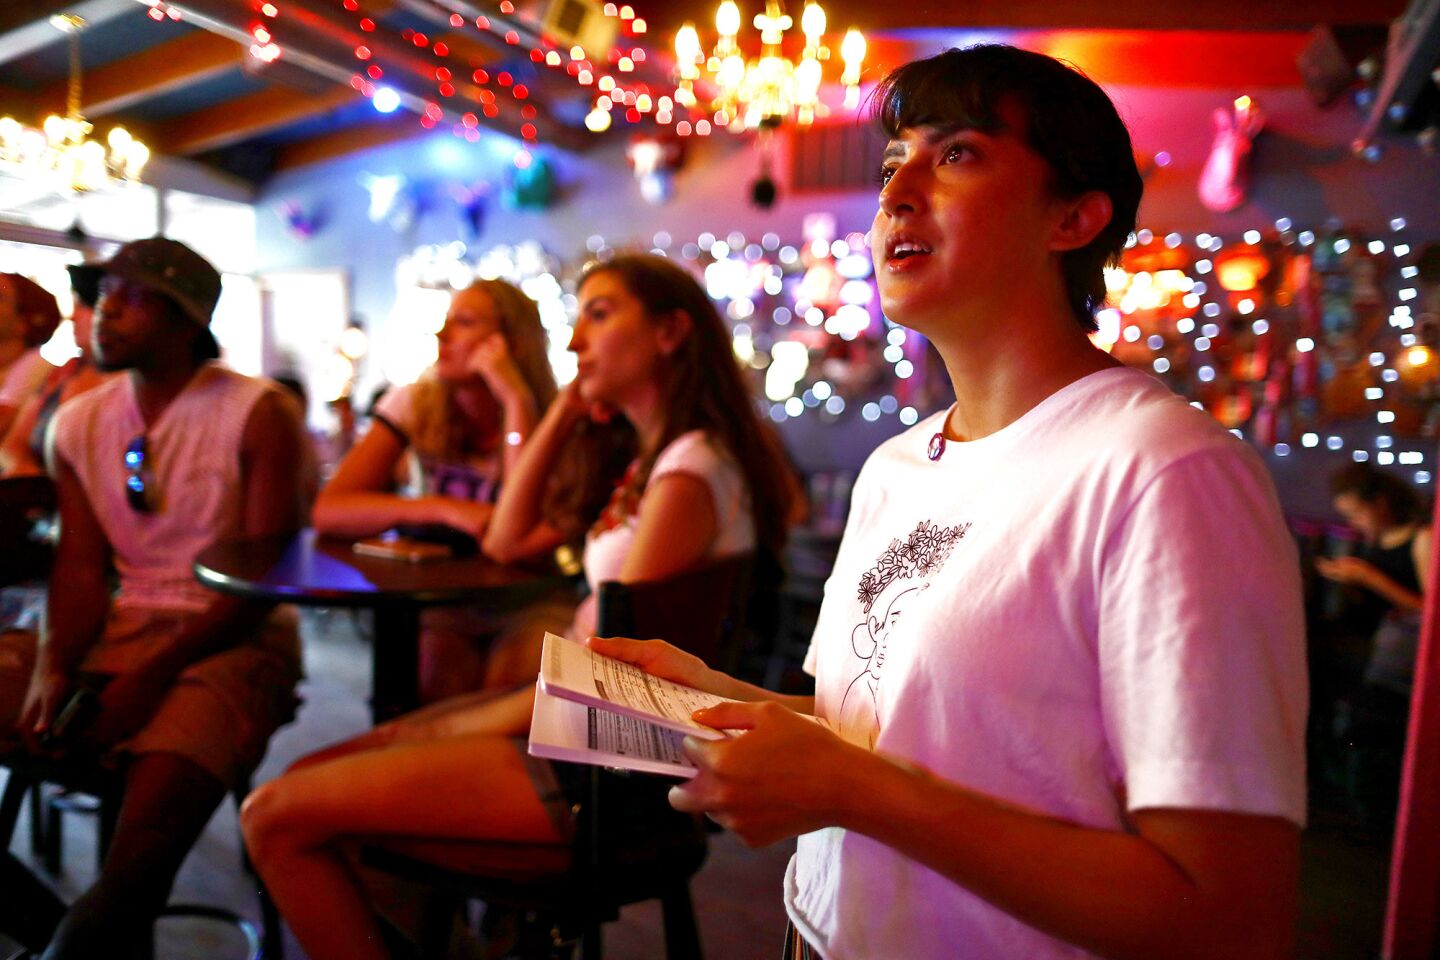 Immigration rights activist Angel Ulloa watches the debate broadcast at a viewing party in El Paso. Ulloa is the local coordinator of the Latino progressive organization Jolt, which hosted the watch party in a bar near the U.S.-Mexico border.